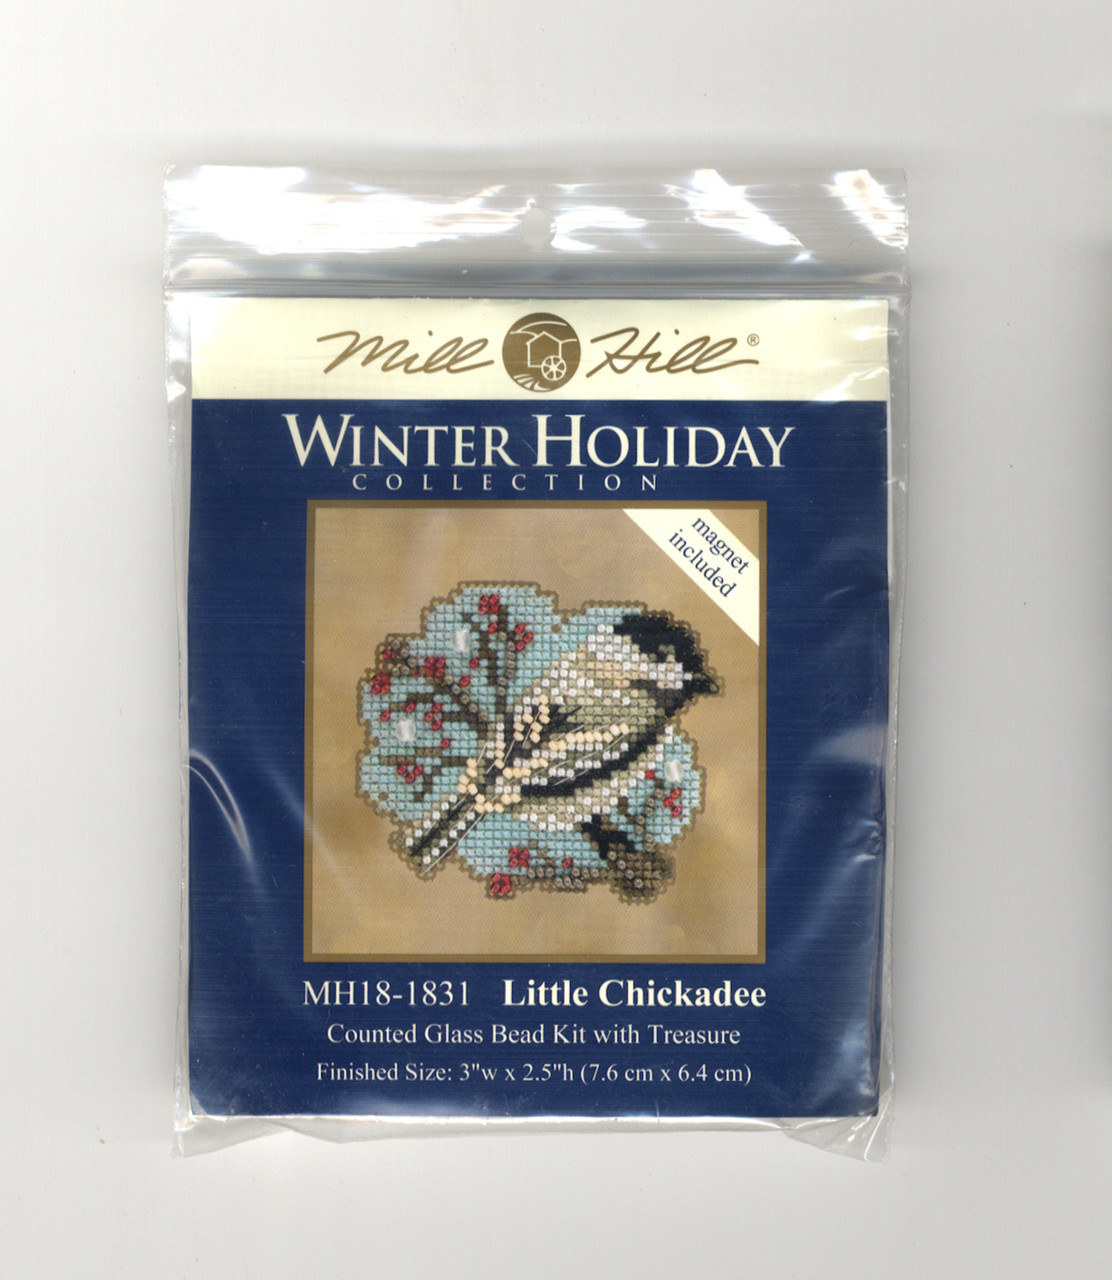 Mill Hill 2018 Winter Holiday Collection - Little Chickadee Ornament